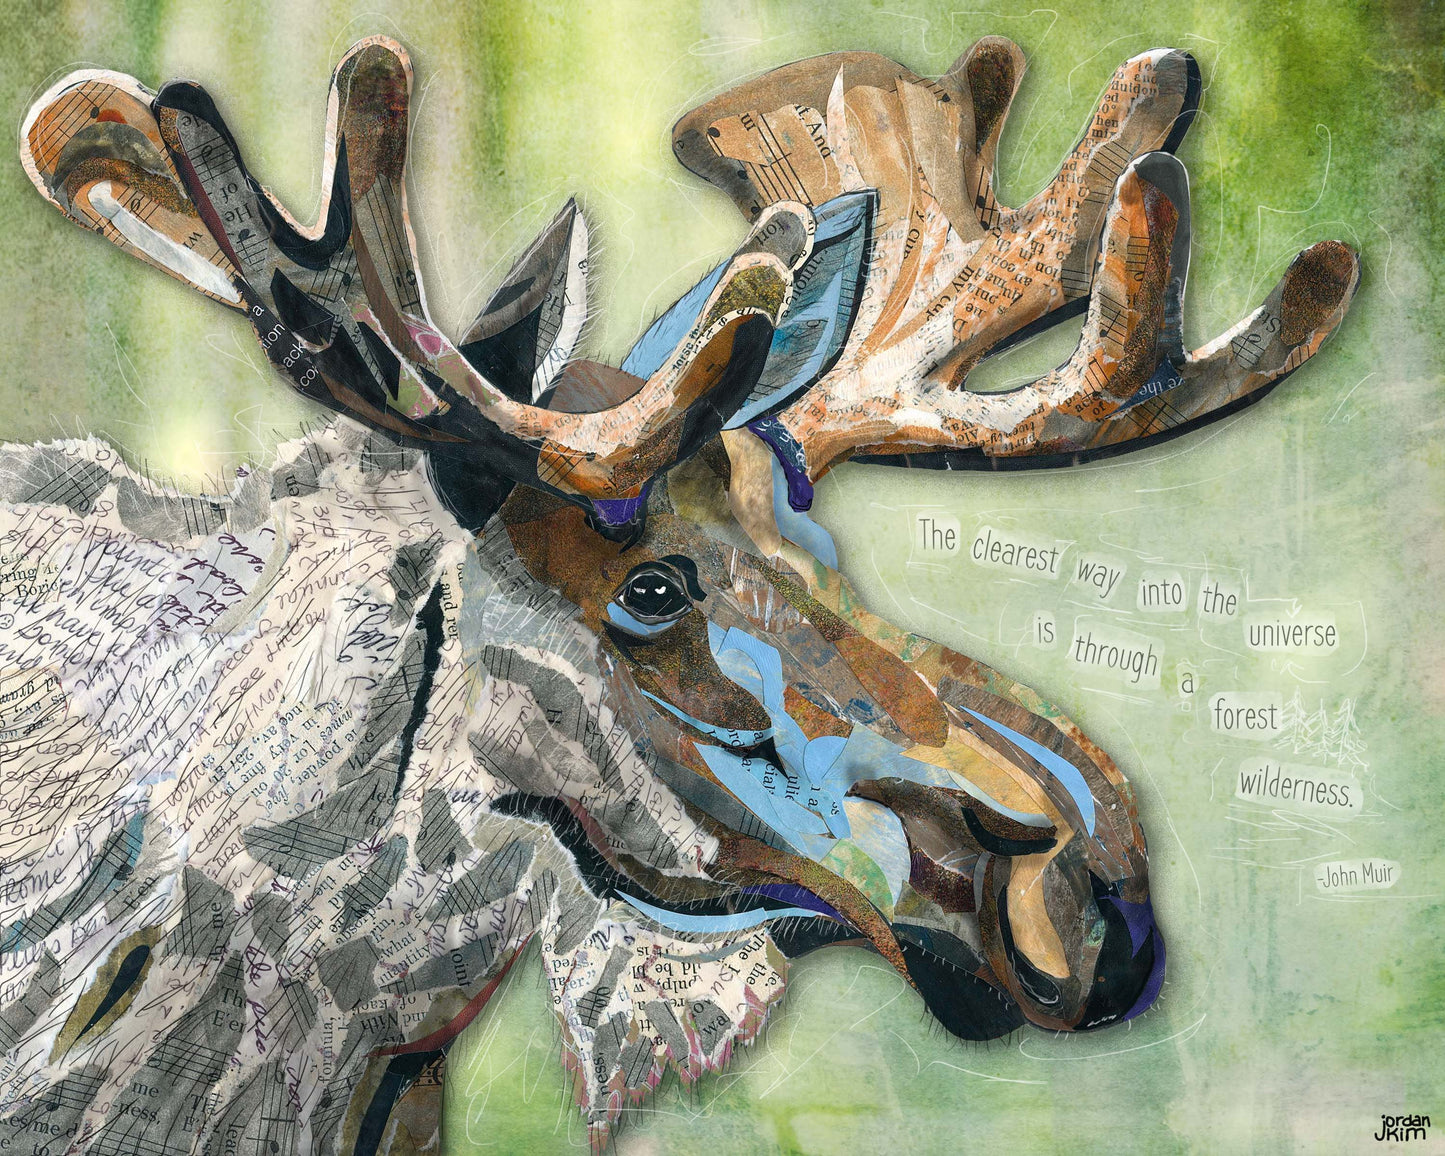 Greeting Card of mixed media collage of a moose in the forest with a John Muir quote about the wilderness, green, nature - Blank Inside